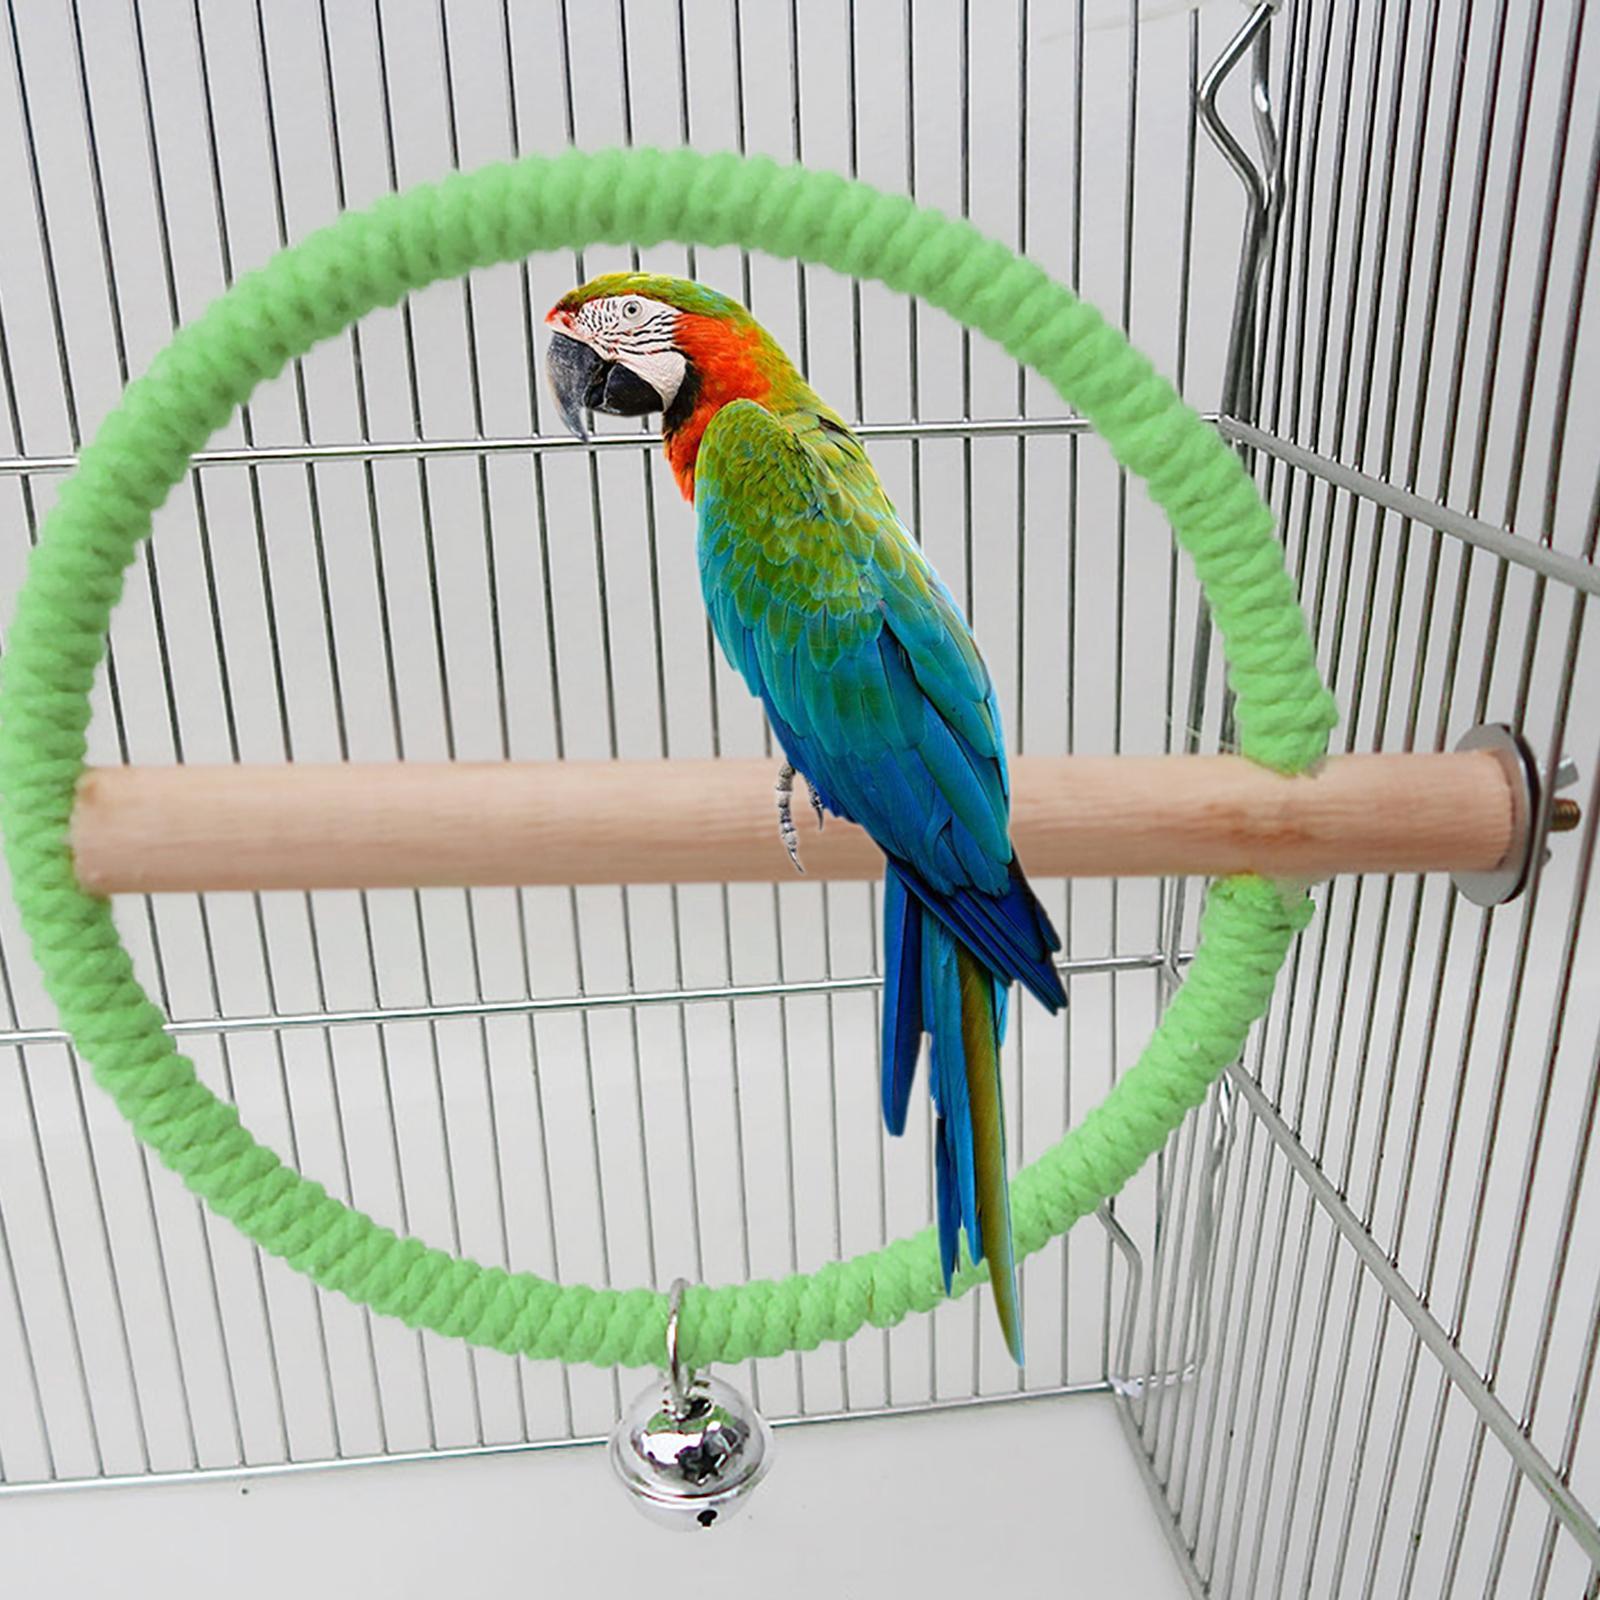 Playground Natural Wooden Bird Parrot Swing Stand Cage Training Toy